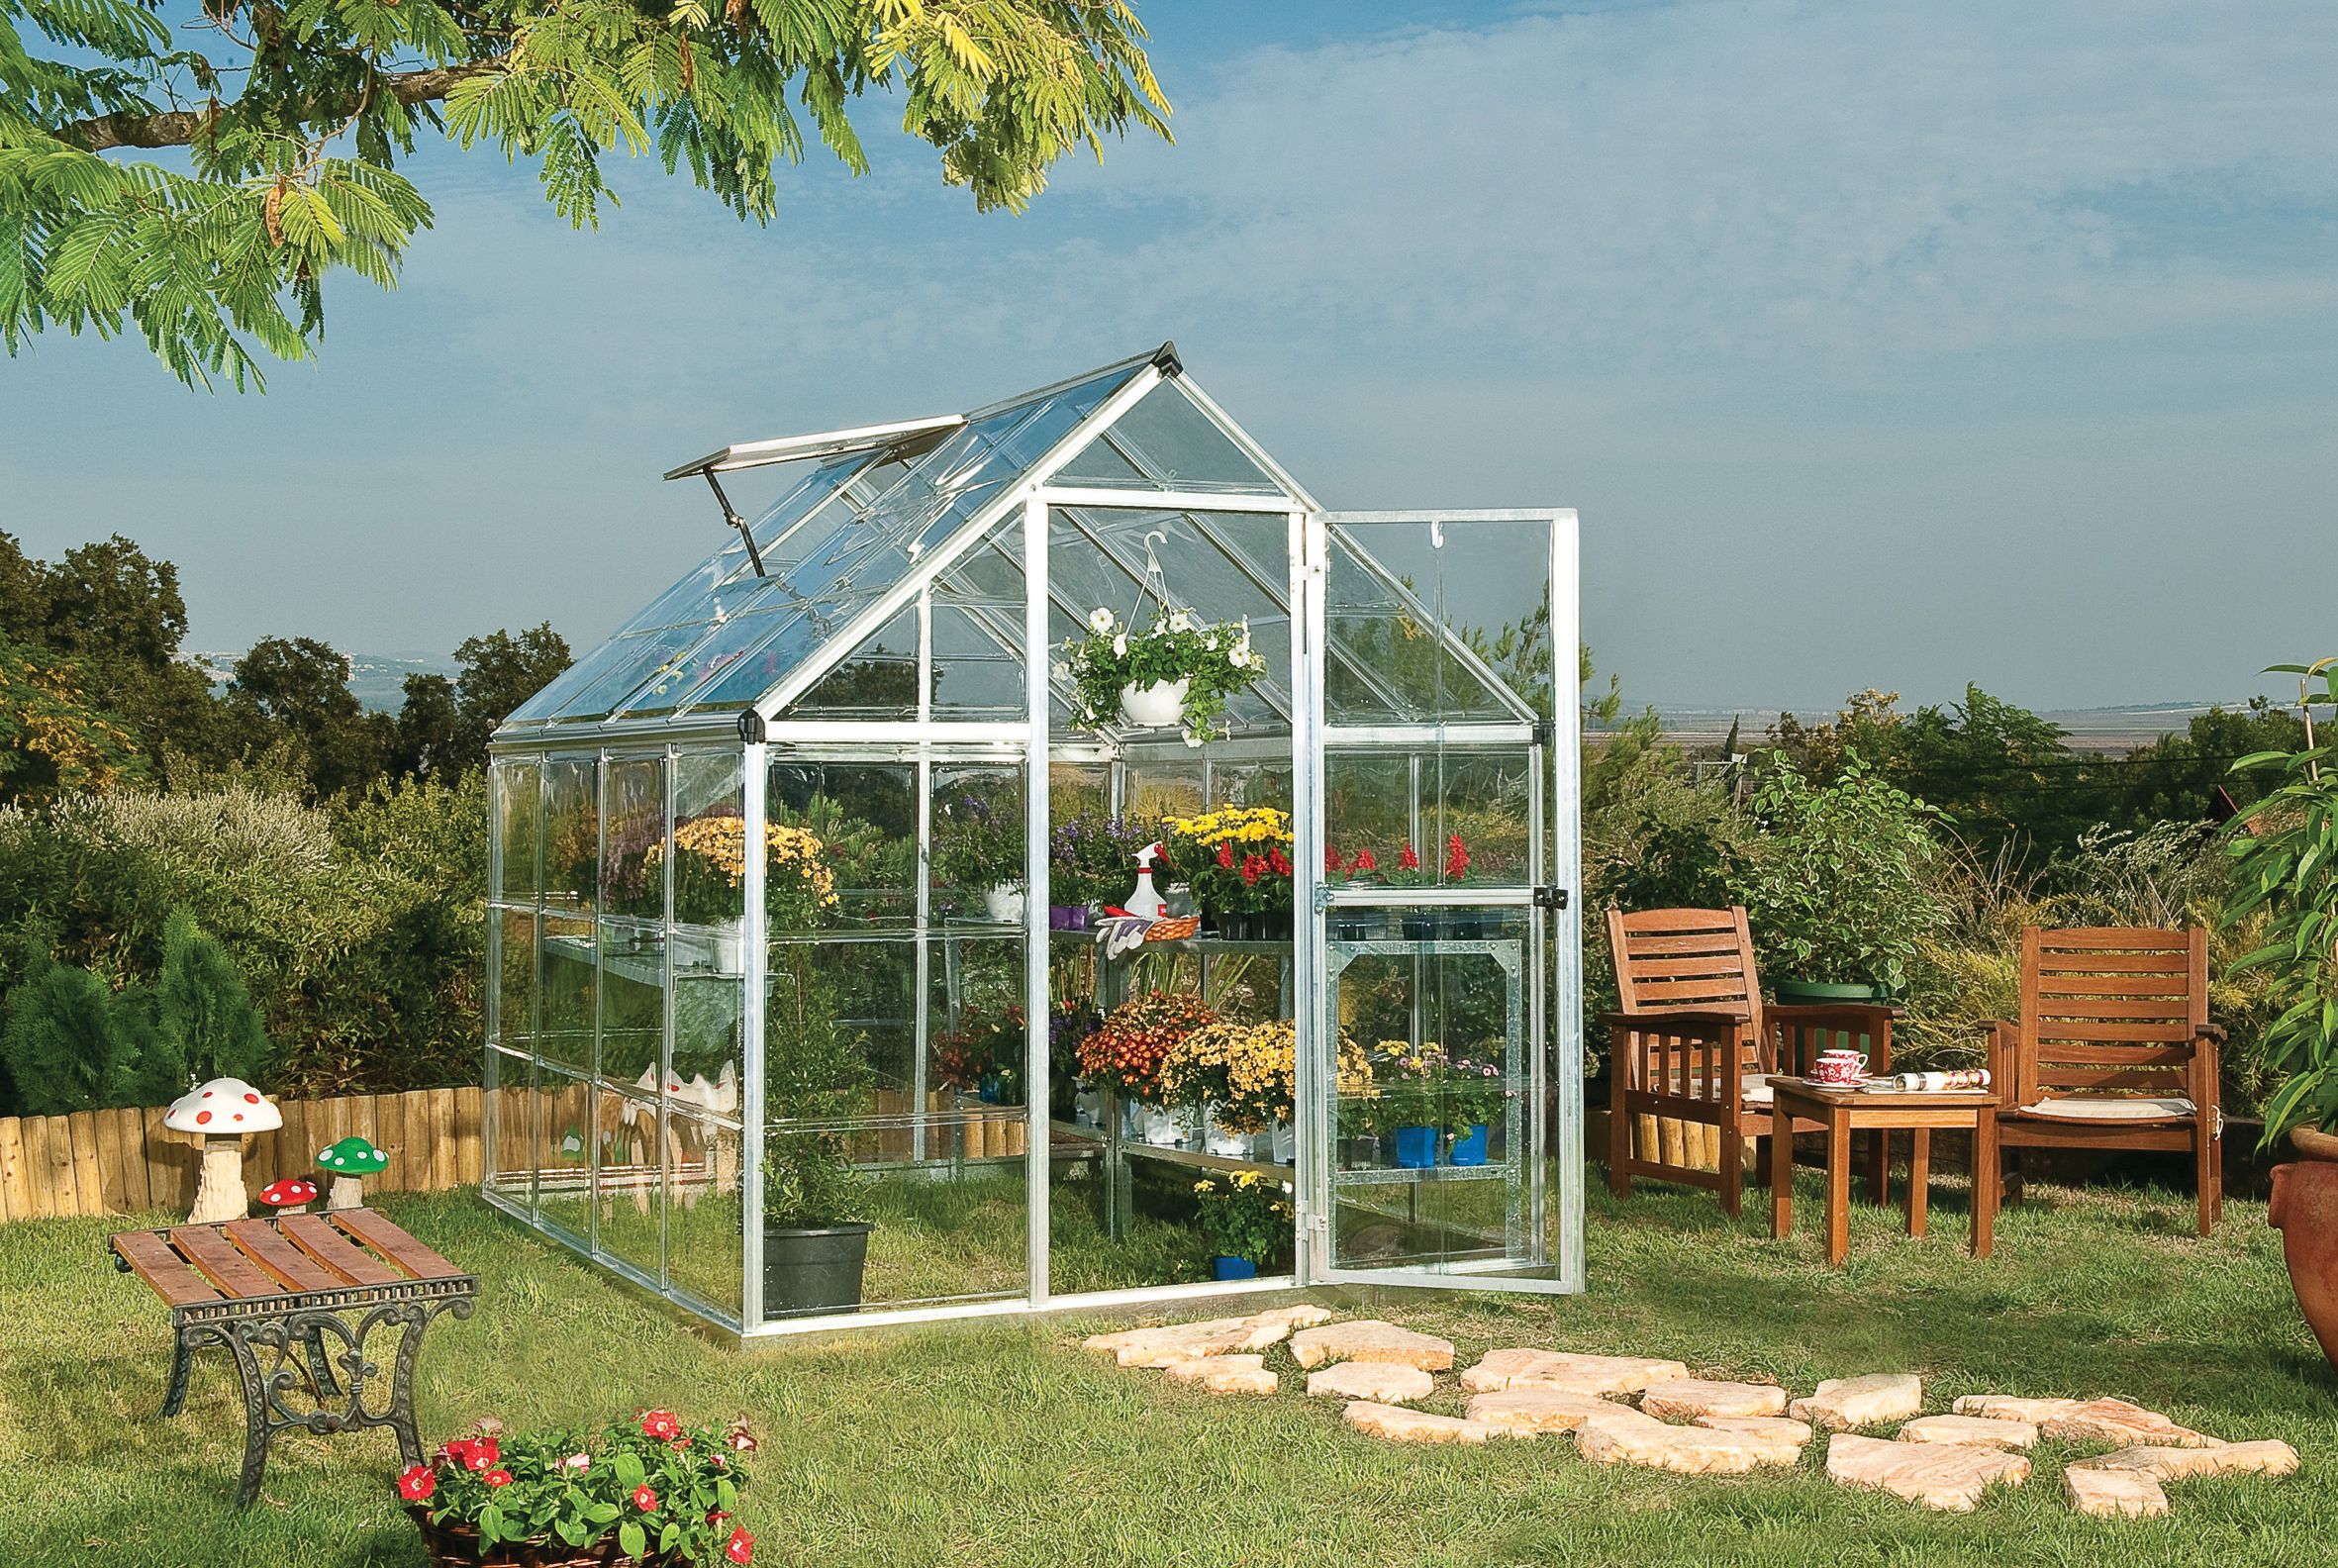 Palram Silver Canopia Harmony Aluminium Apex Greenhouse with Clear Polycarbonate Panels - 6 x 8ft